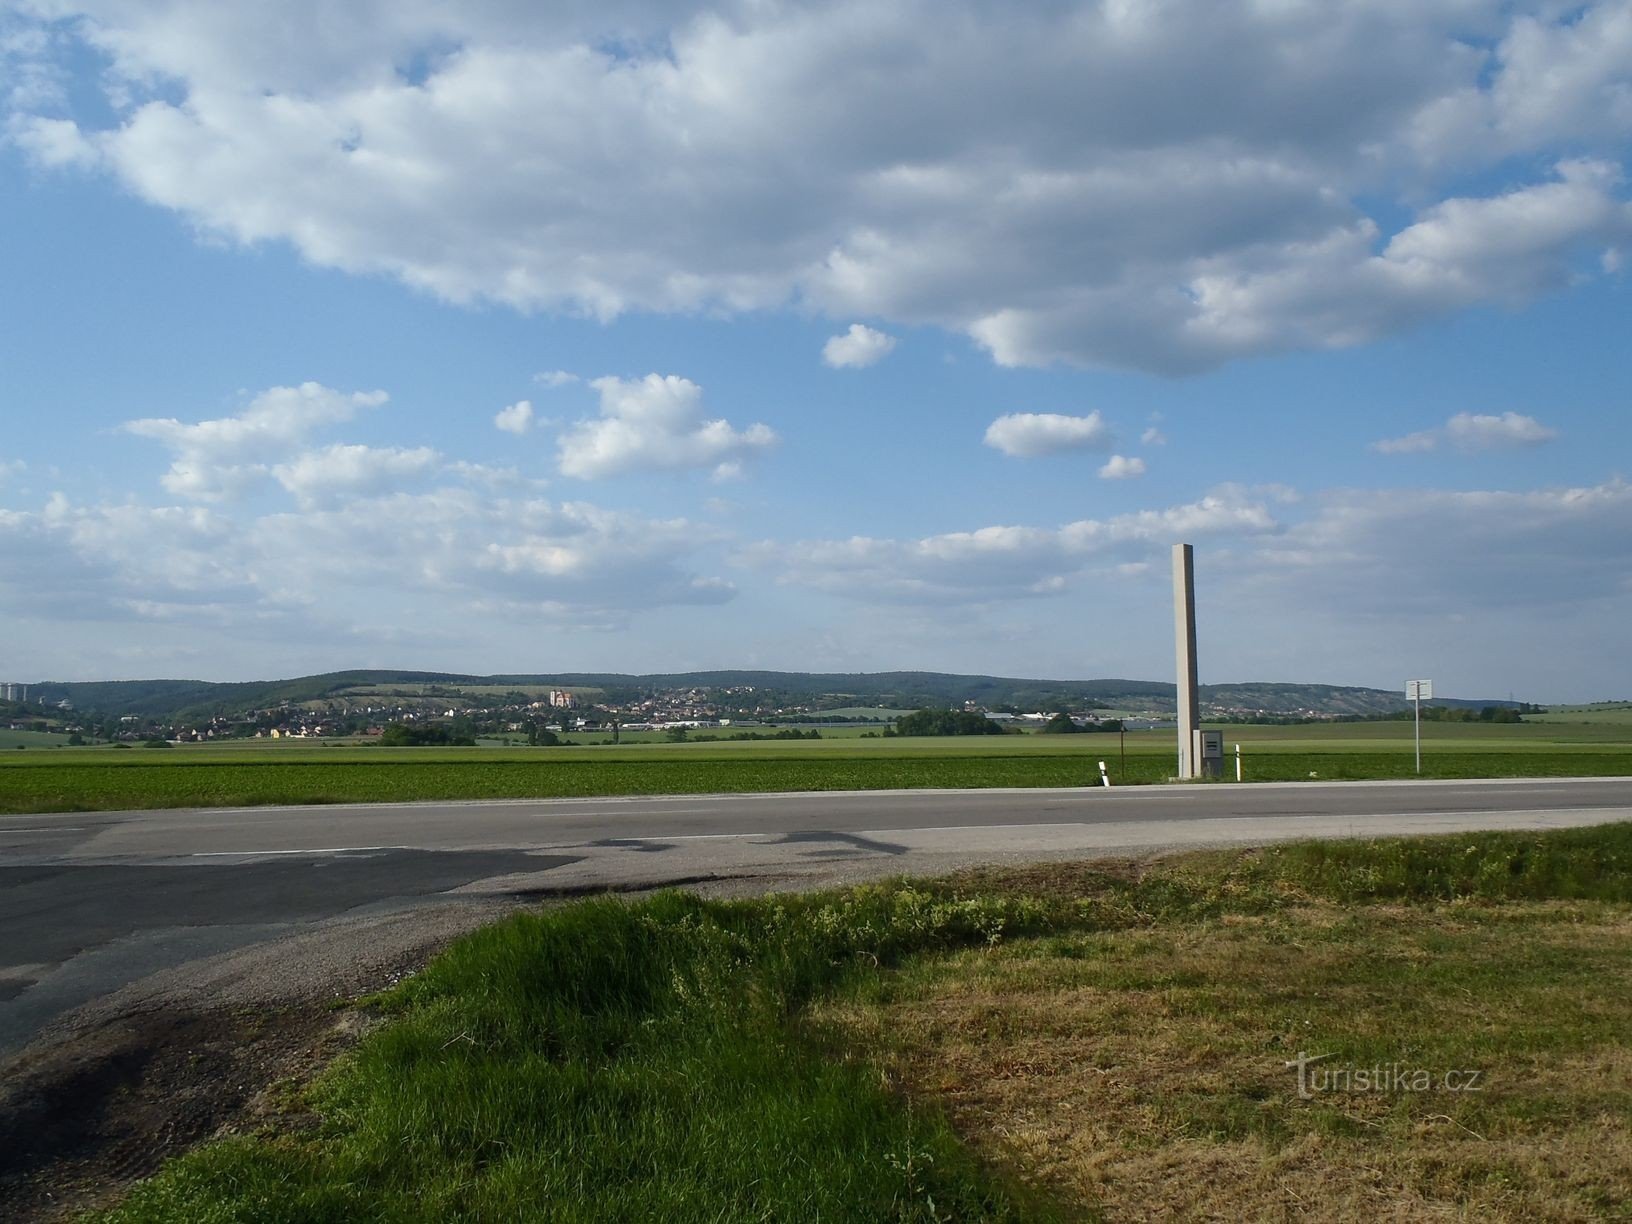 Monument to Bedřich Soffer. In the background, the village of Pozořice - 25.5.2012/XNUMX/XNUMX